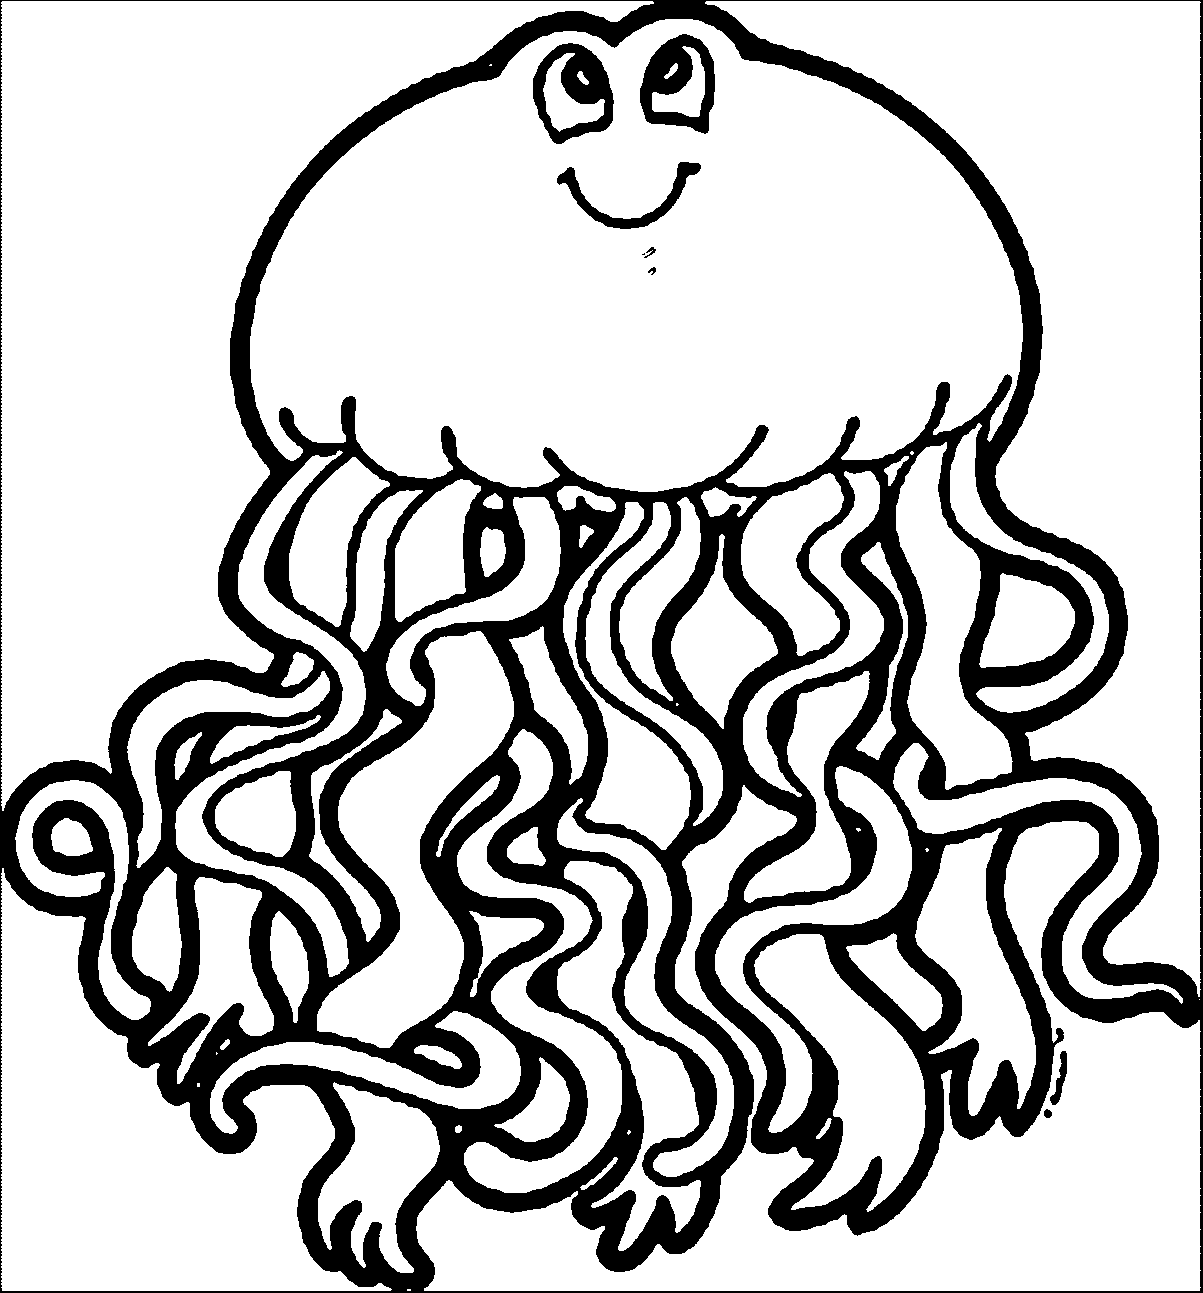 Jellyfish clip art bdcr9qdt9 wecoloringpage wikiclipart 2